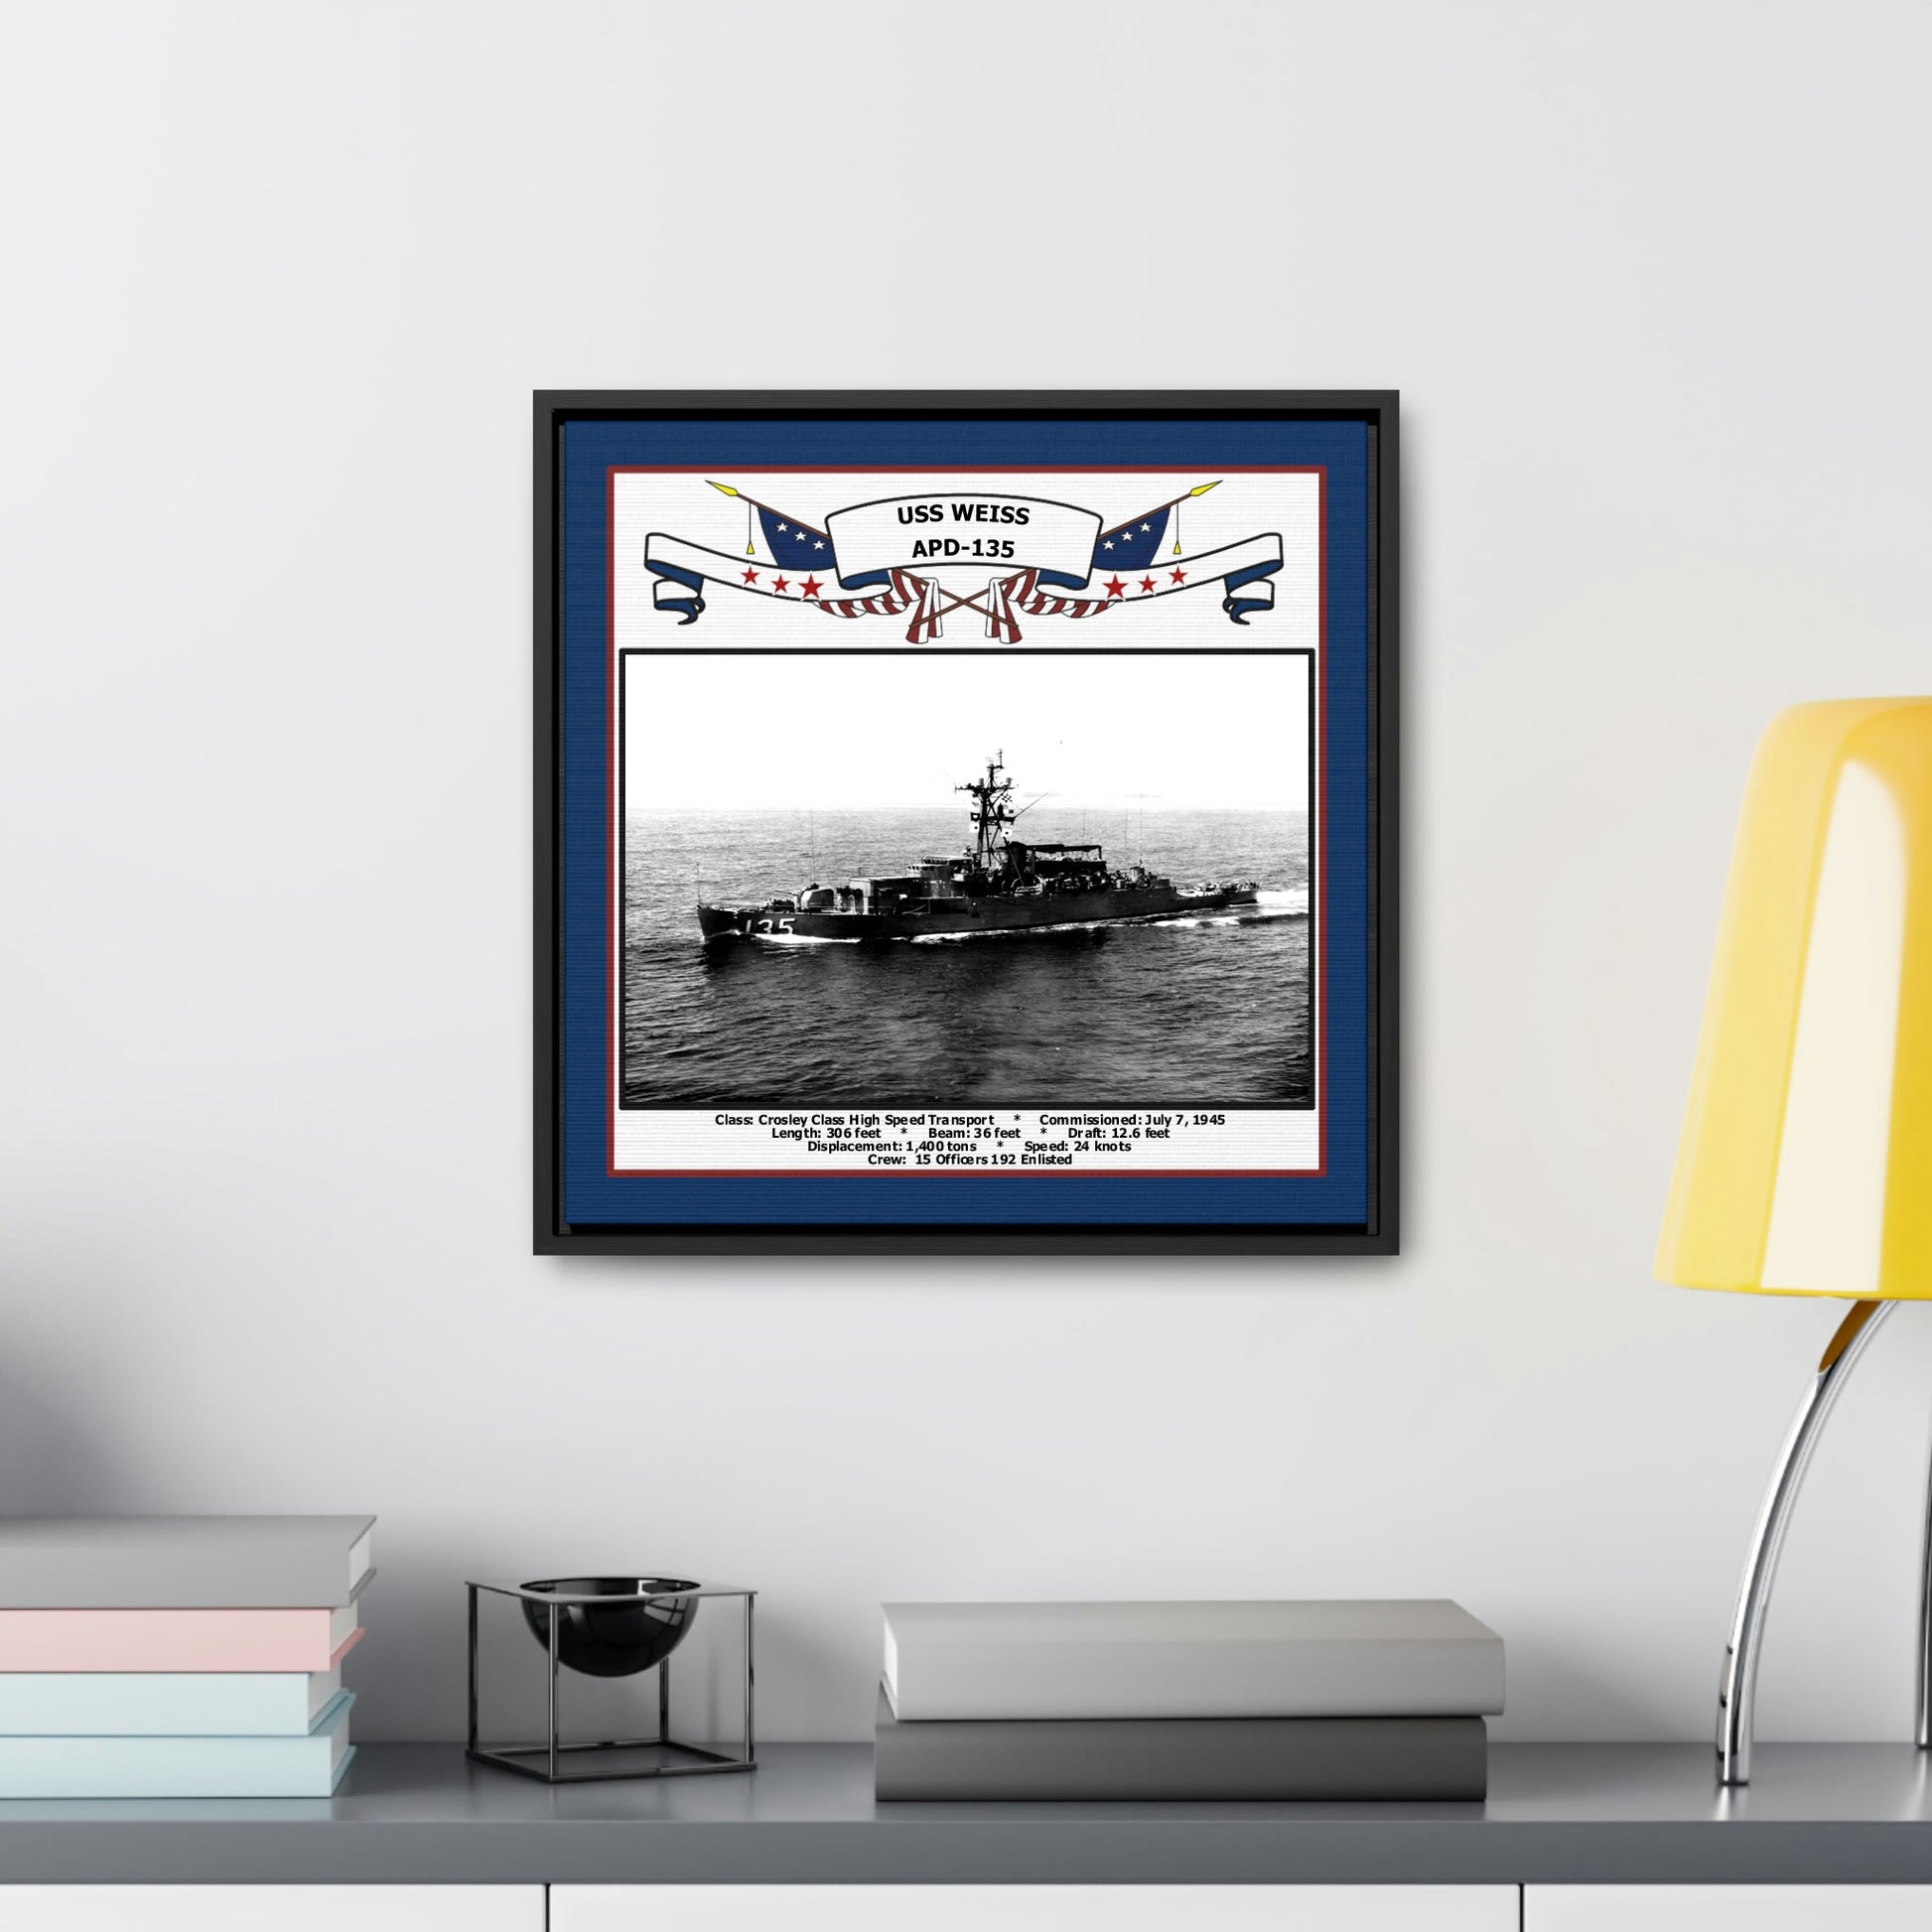 USS Weiss APD-135 Navy Floating Frame Photo Desk View